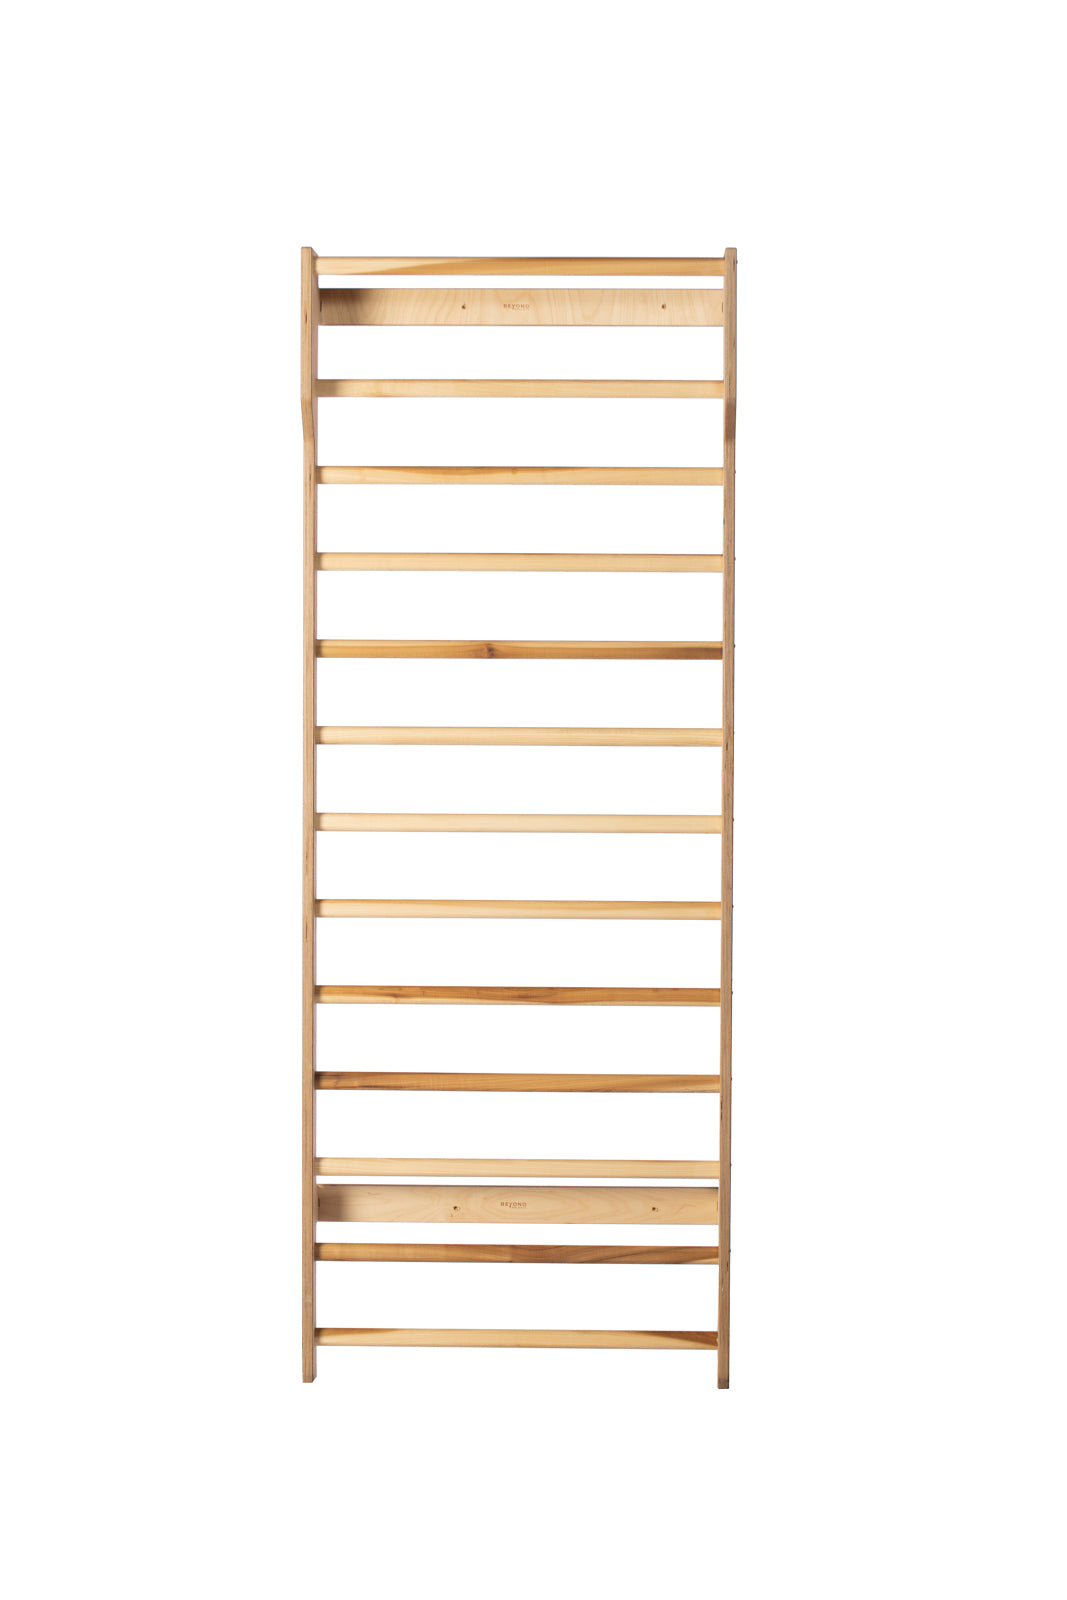 Wood Swedish Ladder Stall Bar for PSSE Therapy; Oval Rungs